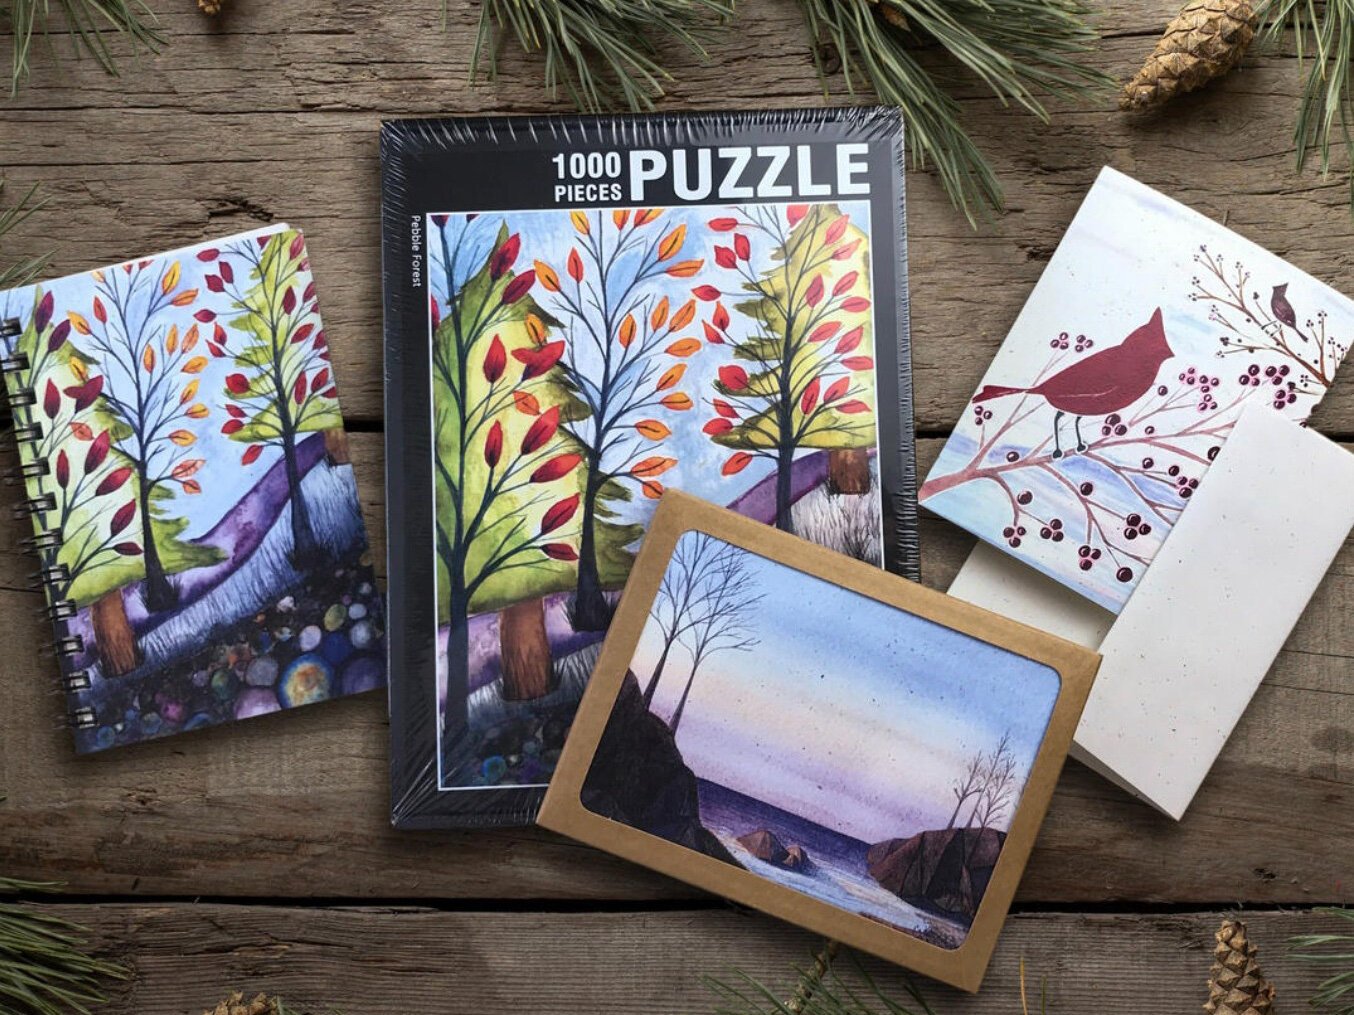 Beth Millner's nature-inspired artisan goods include puzzles and notebooks.